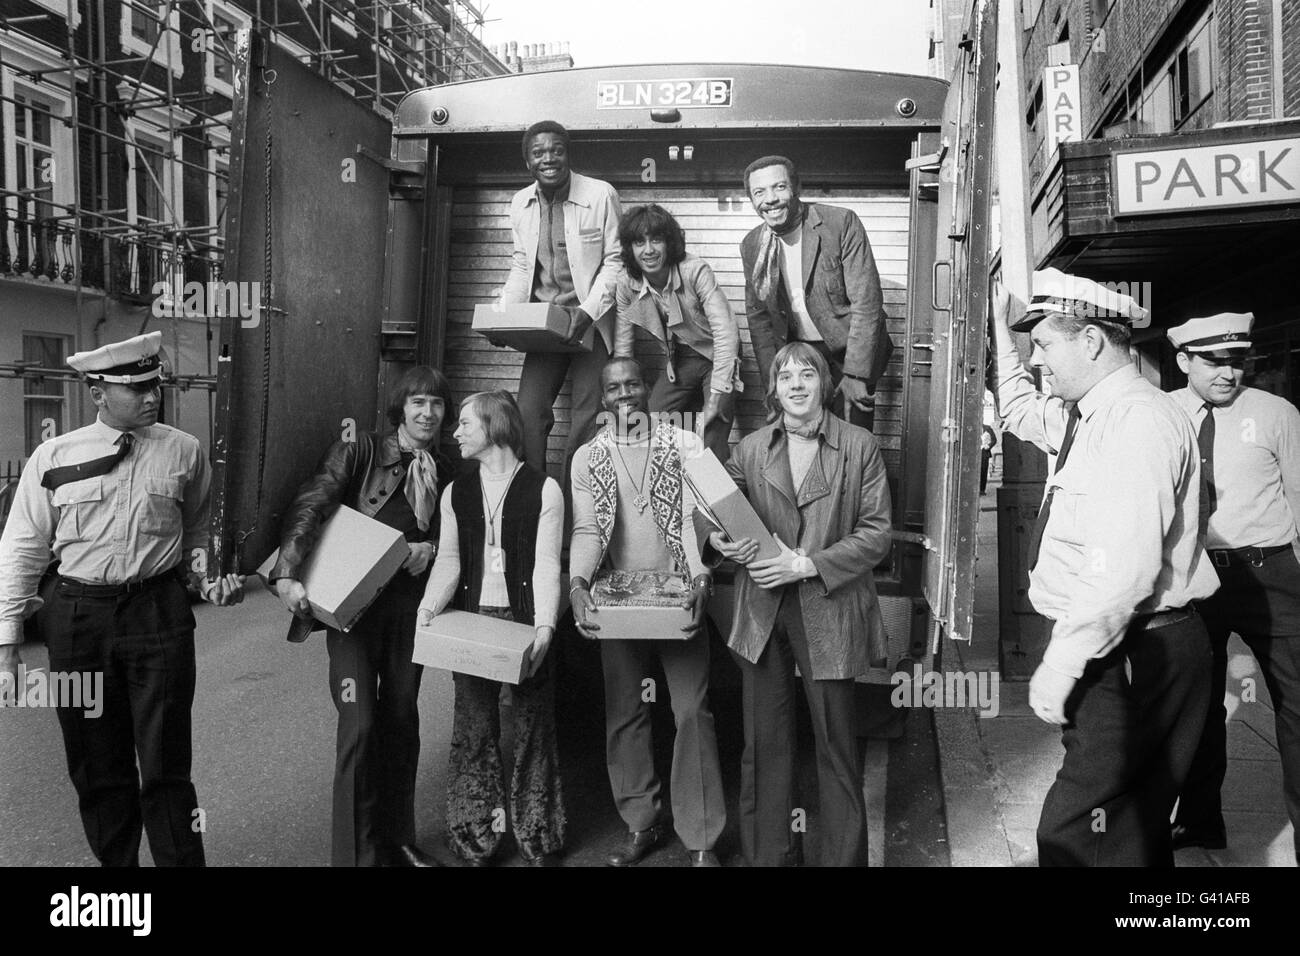 Because they say some of their songs have been pirated, The Foundations pop group have their latest album delivered by security truck. The group, back row, from left: Colin Young, Tony Gomez and Pat Burke. Front row, from left: Pater MacBeth, Alan Warner, Eric Allendale and Tim Harris. Stock Photo